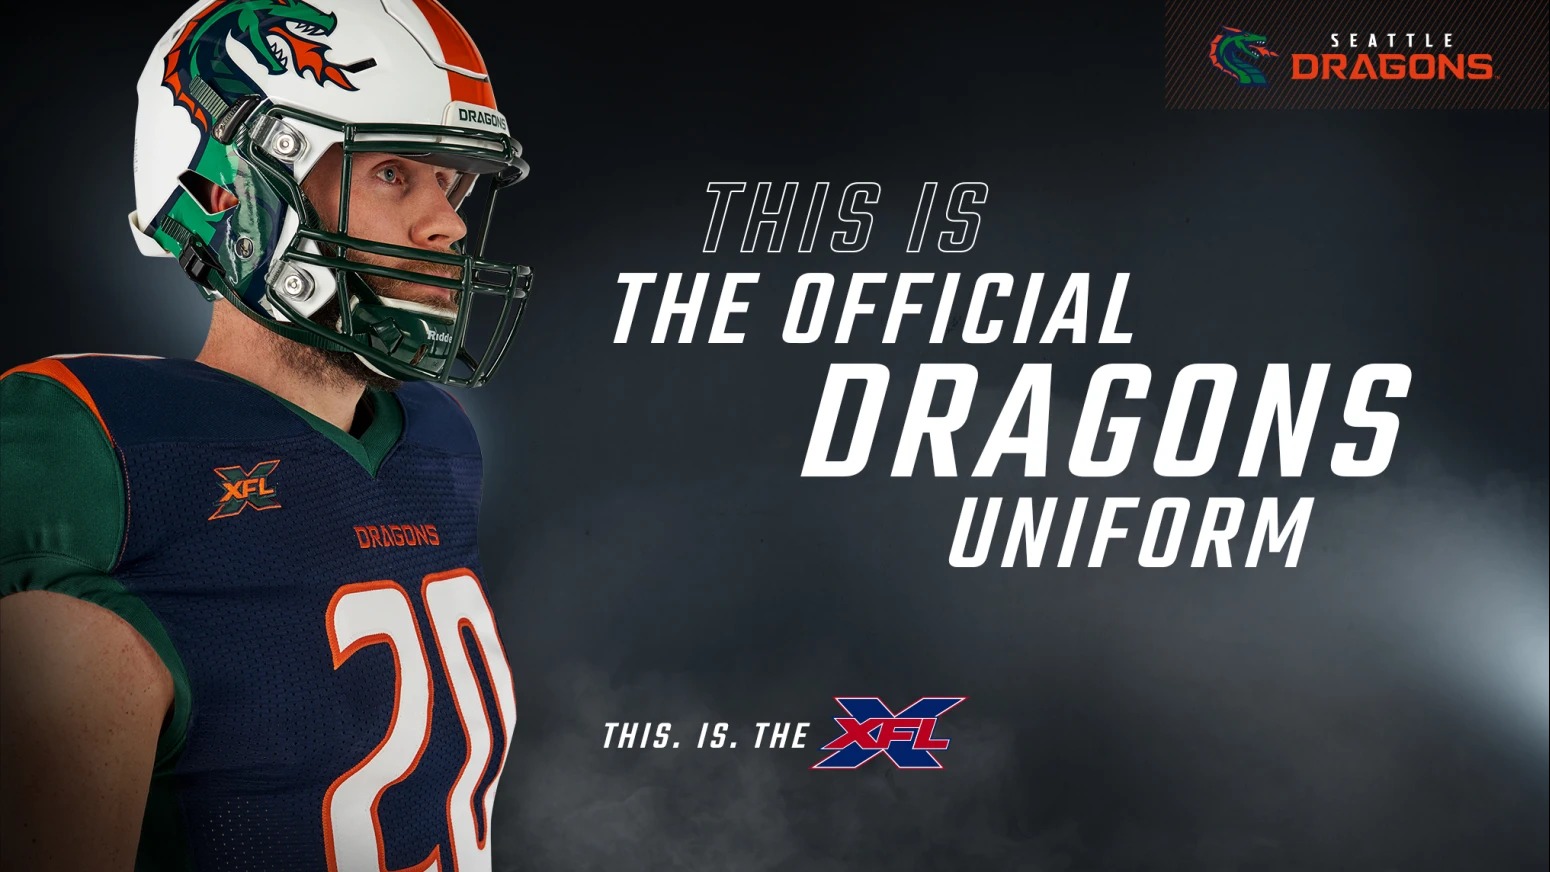 Seattle Dragons unveil XFL uniforms, which get thumbs up from two players